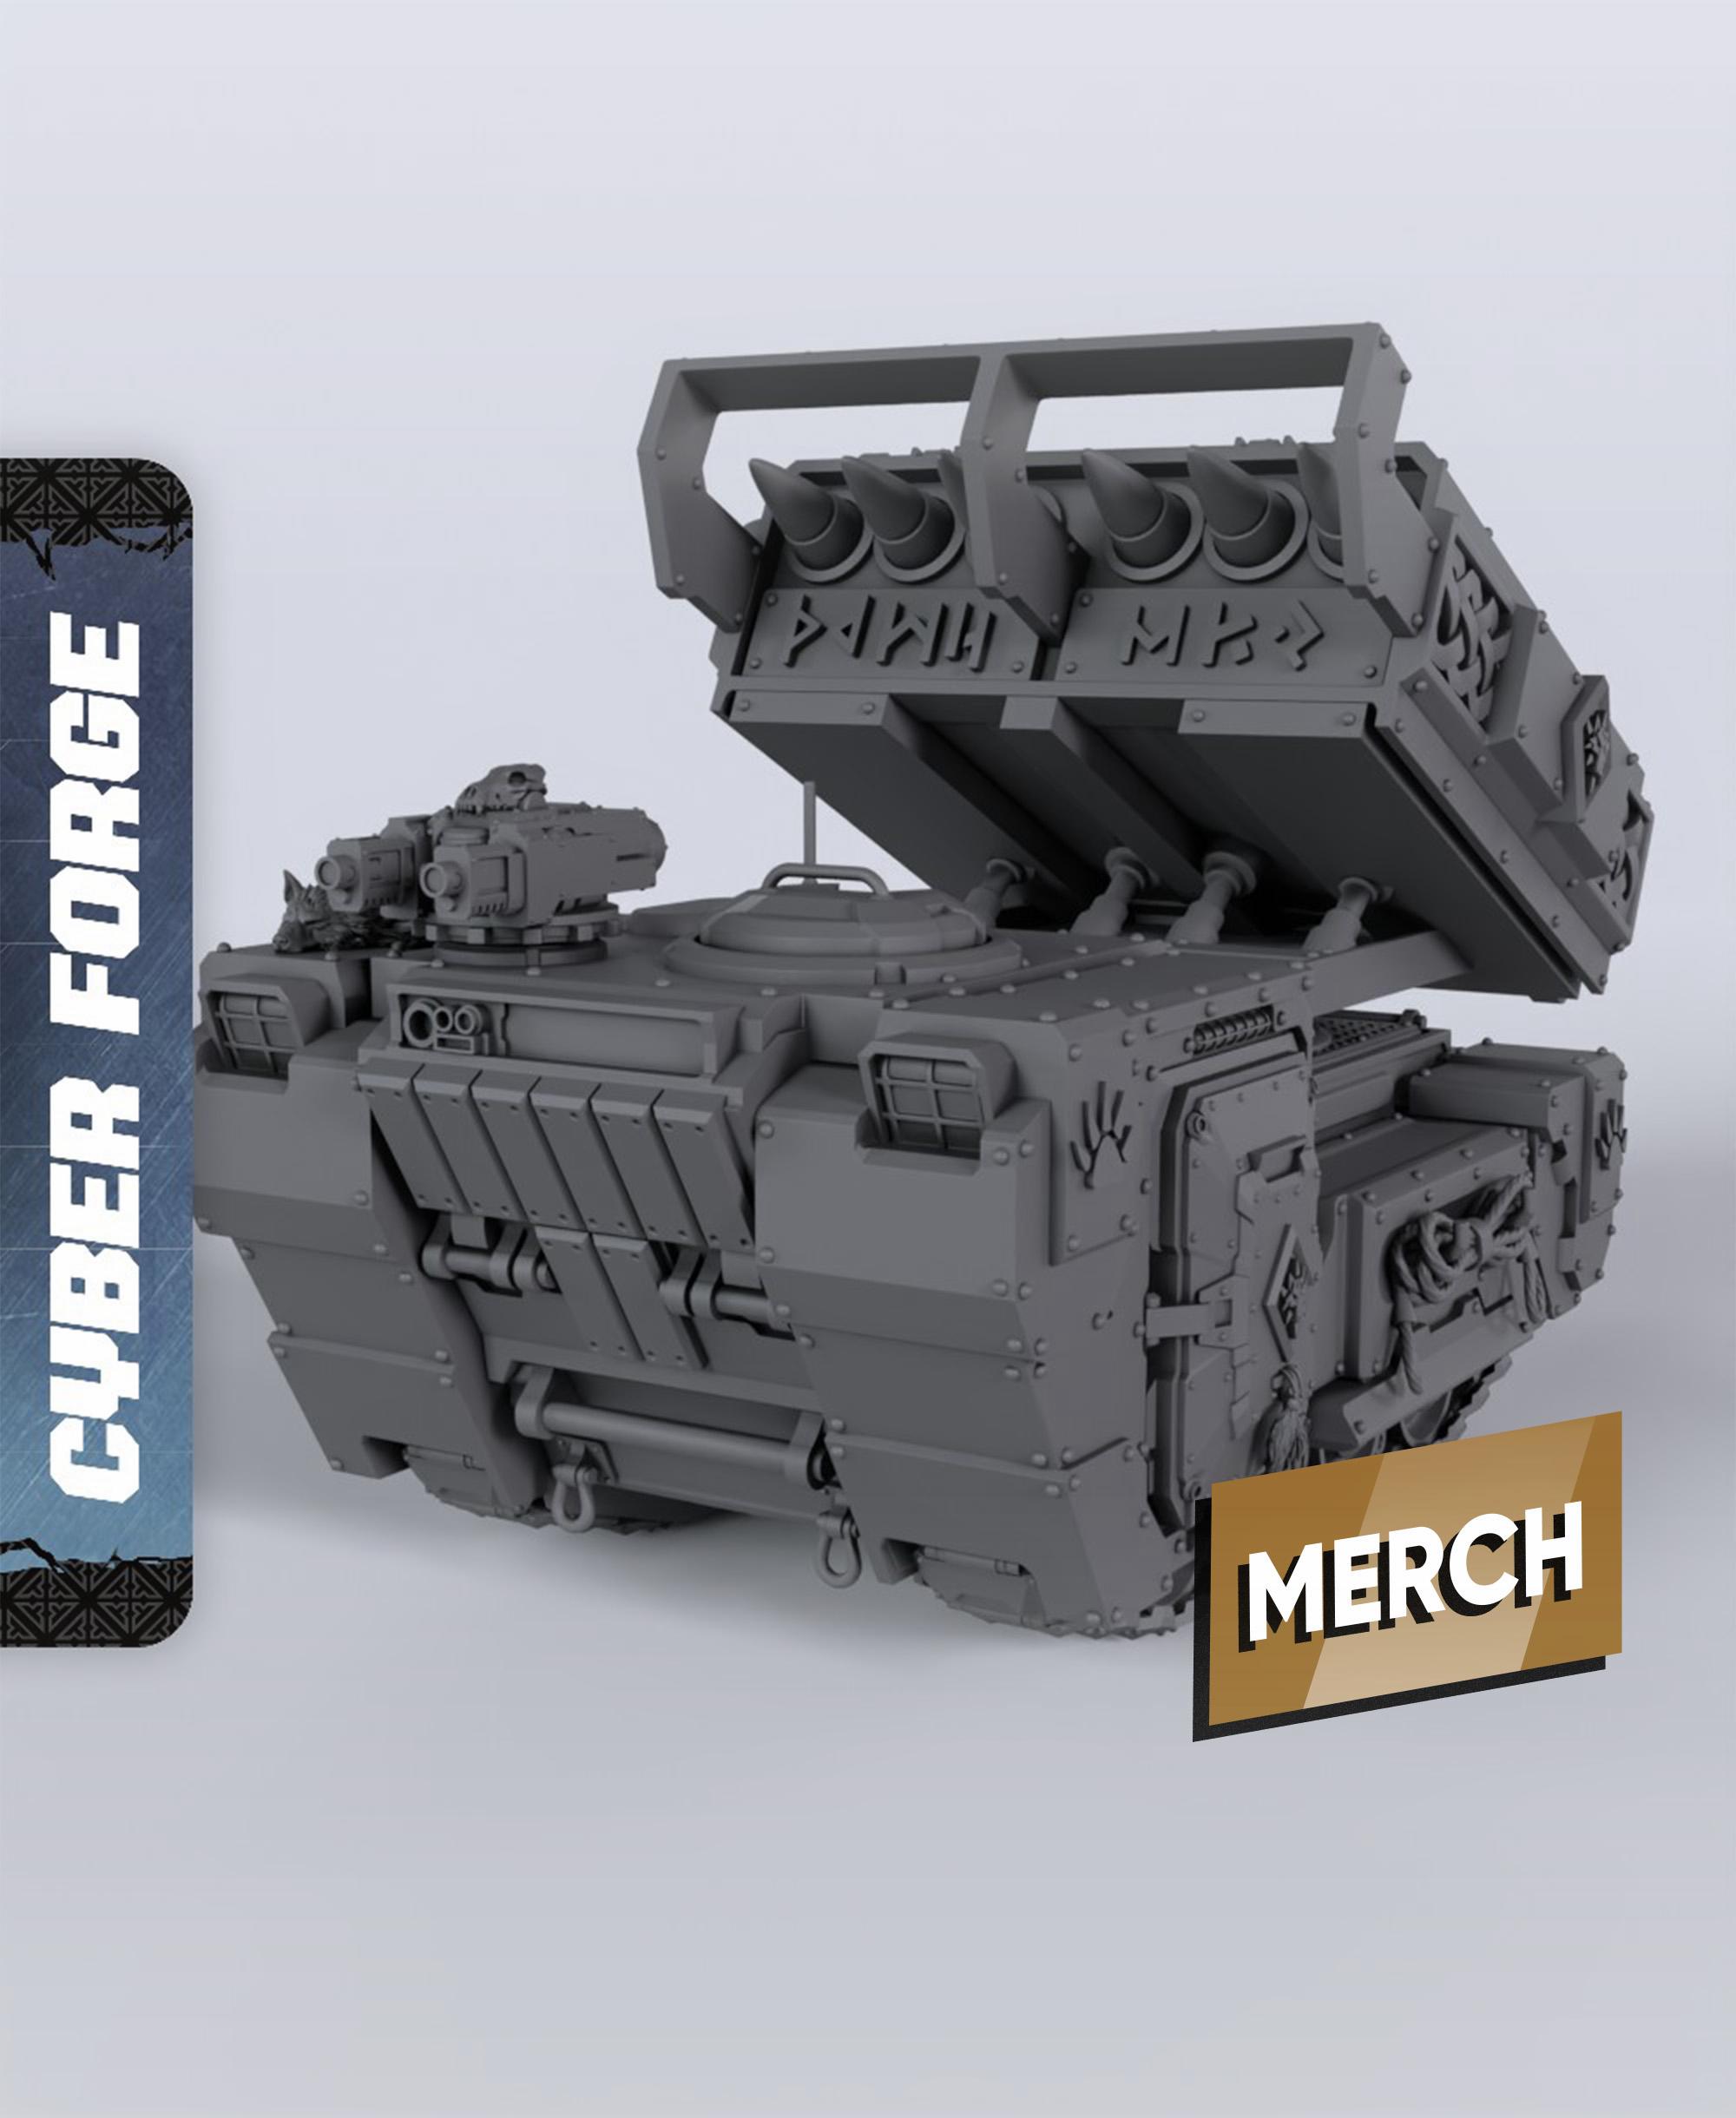 WHD Starhowler - With Free Cyberpunk Warhammer - 40k Sci-Fi Gift Ideas for RPG and Wargamers 3d model